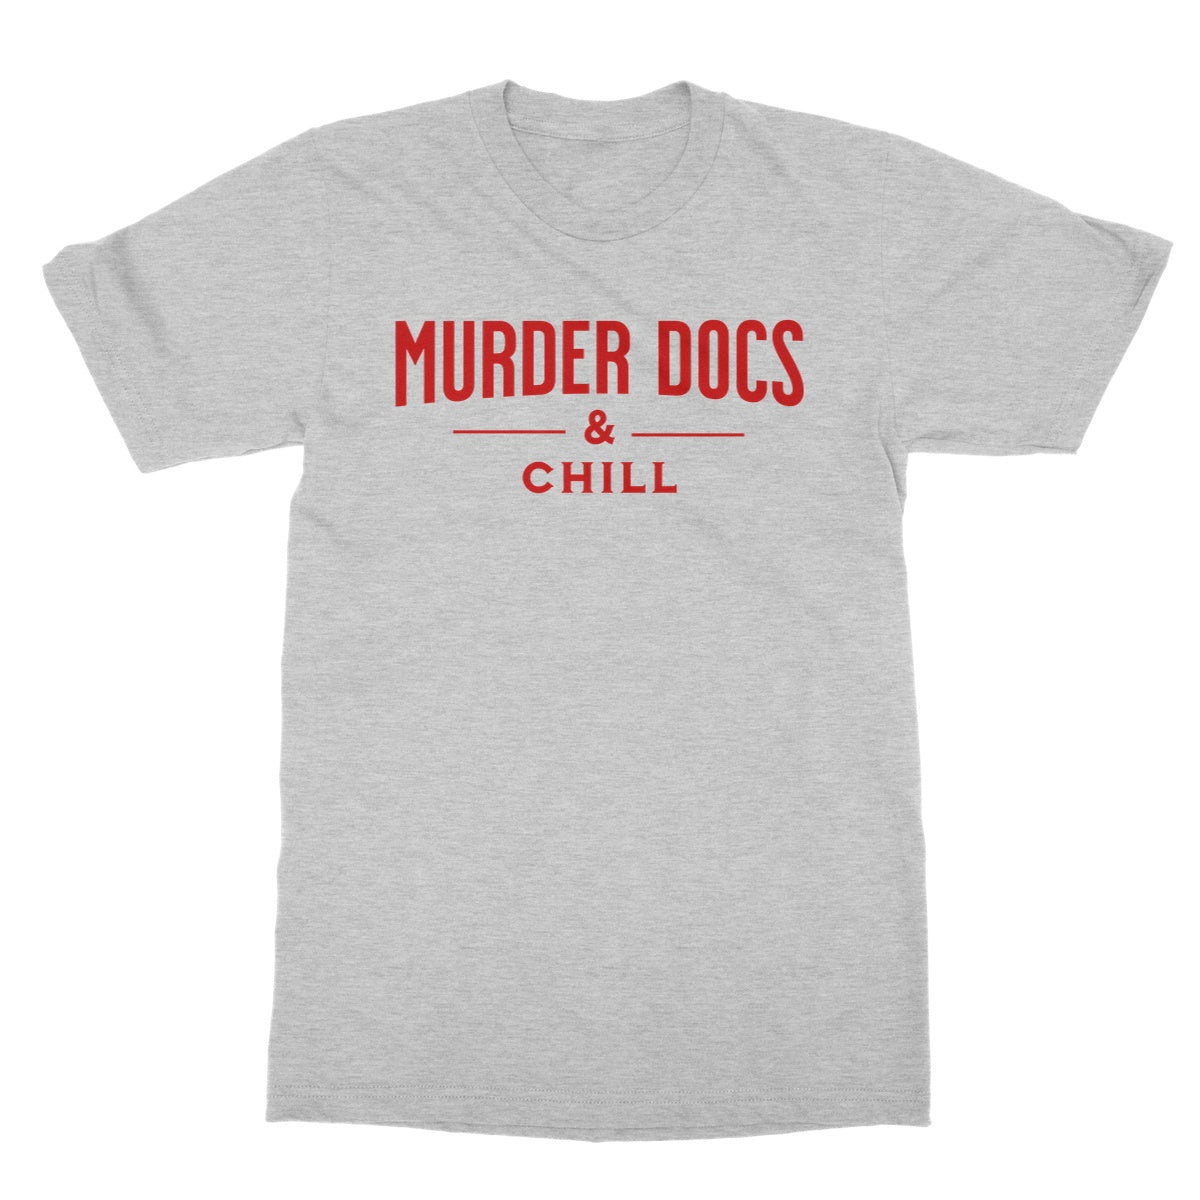 murder docs and chill t shirt grey